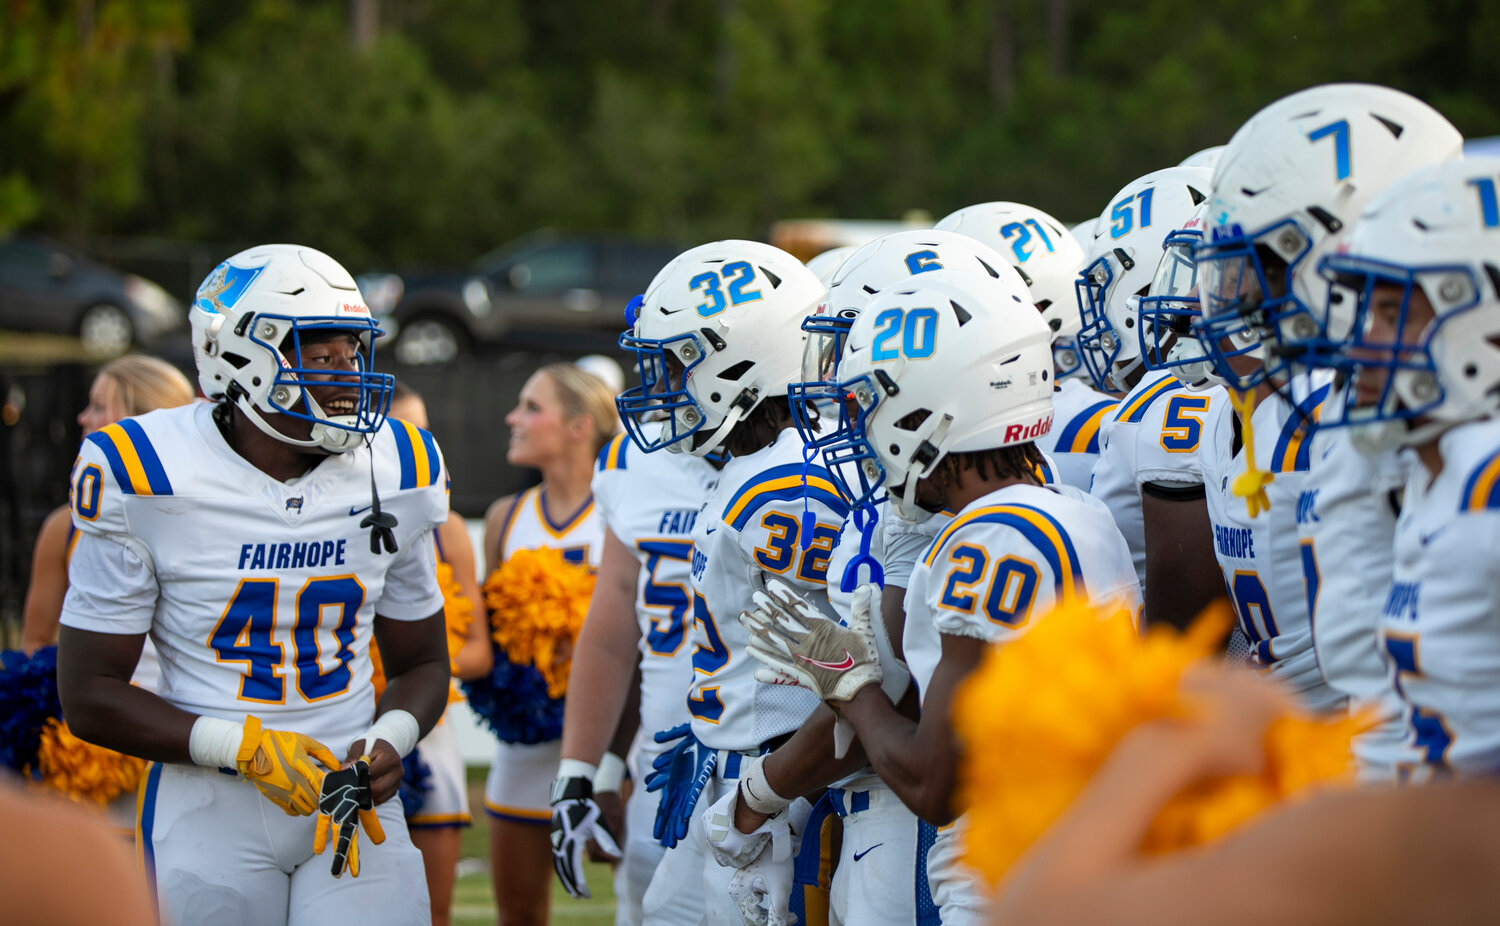 PJ Harbin (40) and the Fairhope Pirates prepare to take the field for their season-opening kickoff against the Spanish Fort Toros on the road on Aug. 24. Fairhope is scheduled to be back at home this Friday for a Week 5 tilt against the Davidson Warriors in Class 7A Region 1 play where the Pirates will be looking for a bounce-back win.